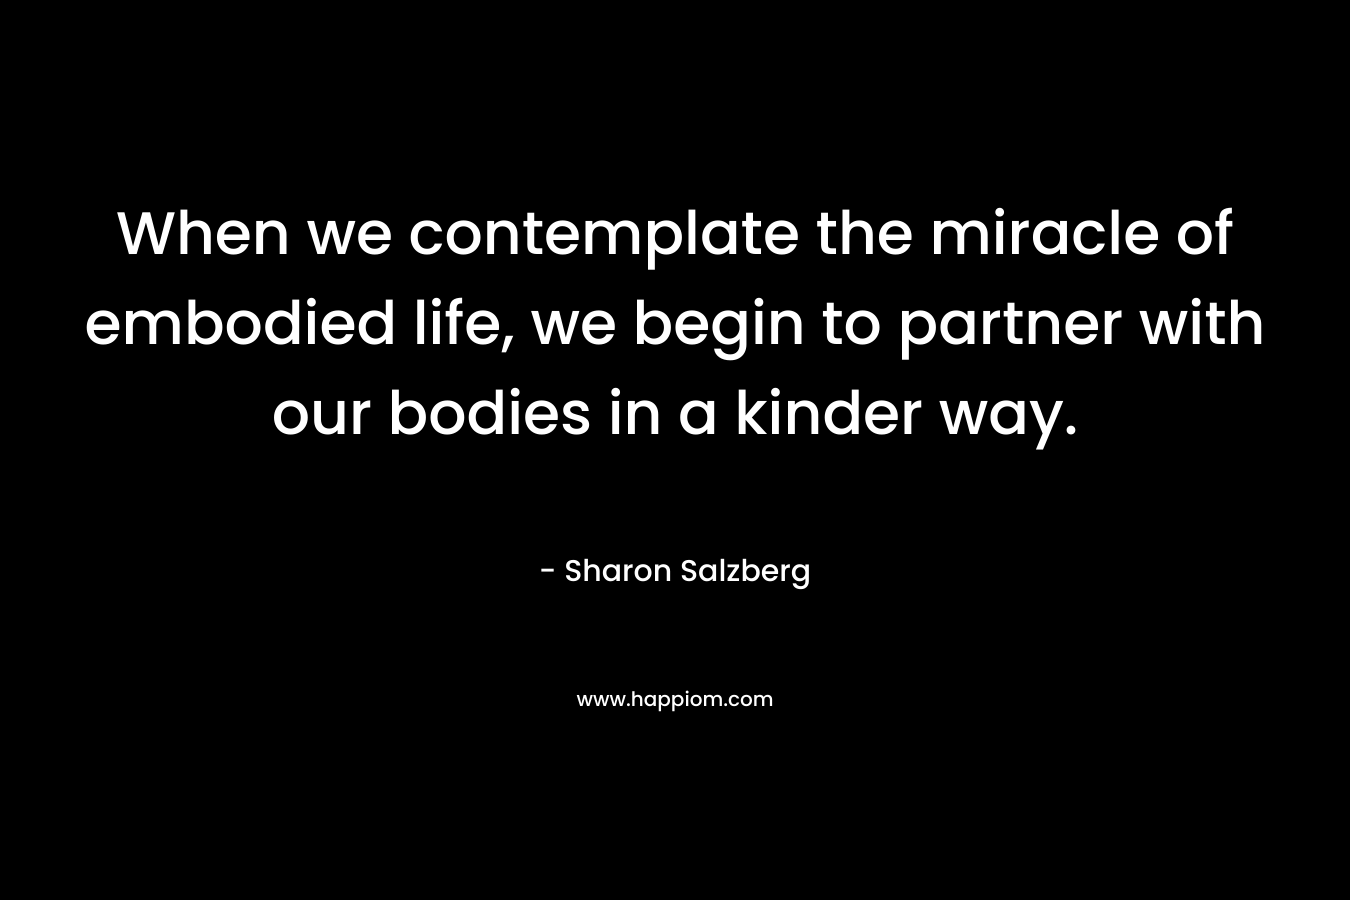 When we contemplate the miracle of embodied life, we begin to partner with our bodies in a kinder way. – Sharon Salzberg